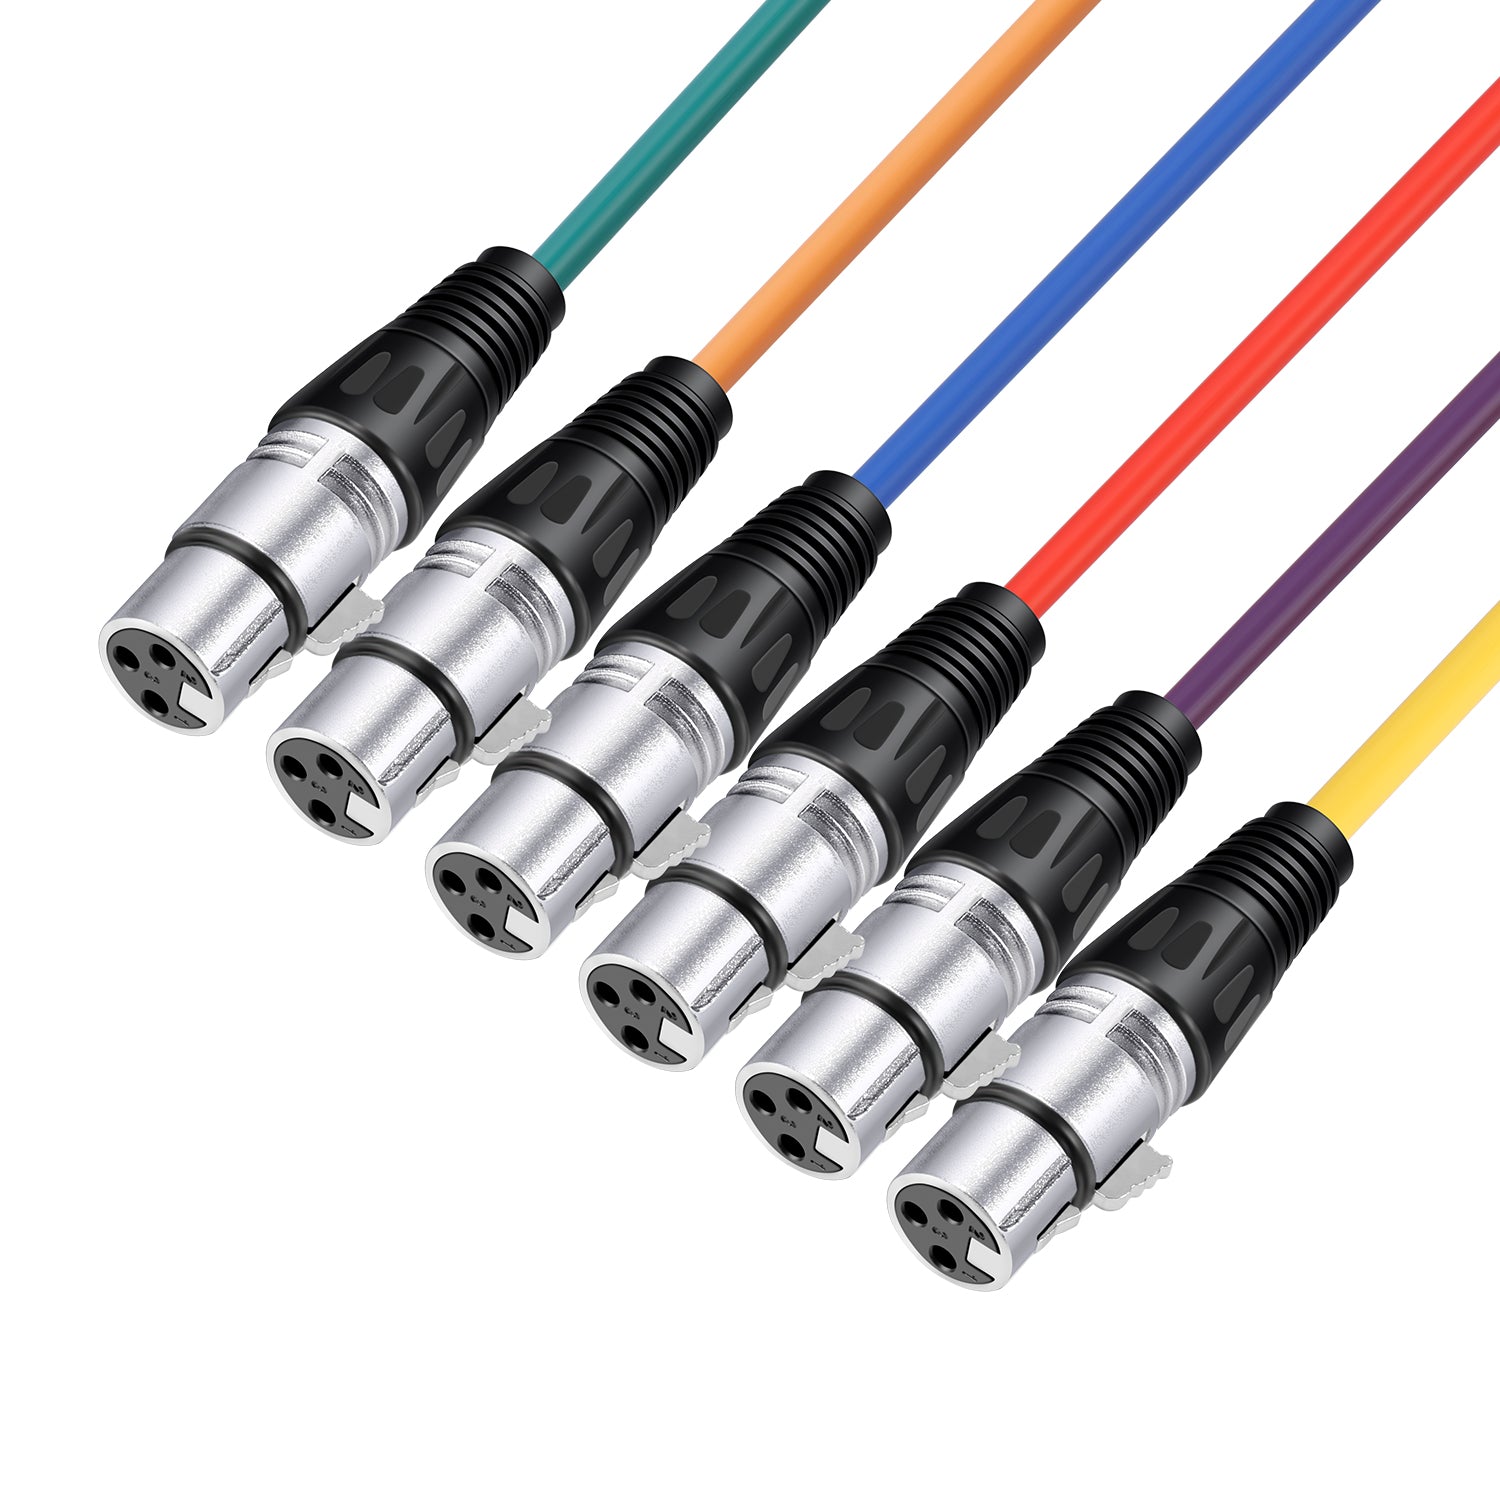 NEEWER 6-Pack 6.5ft/2M XLR Male To XLR Female Color Microphone Cables